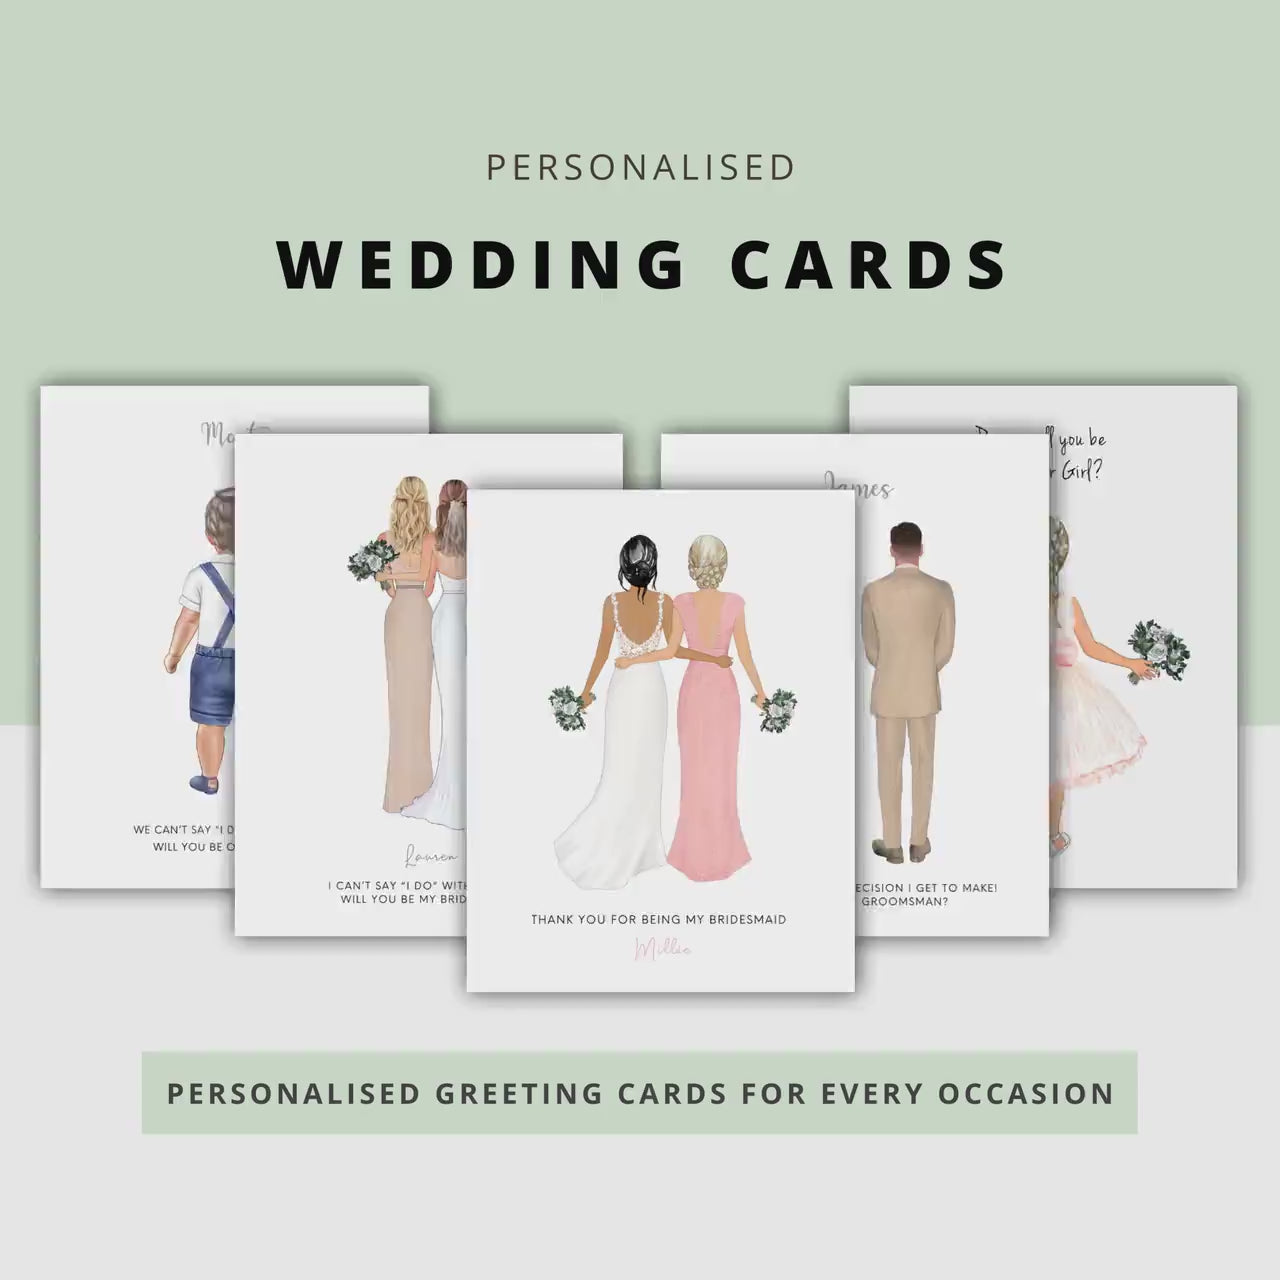 Personalised Will You Be My Bridesman Card, Personalized Proposal, Bridesman Proposal, Will You Be My Bridesman Card, Bridesman Proposal